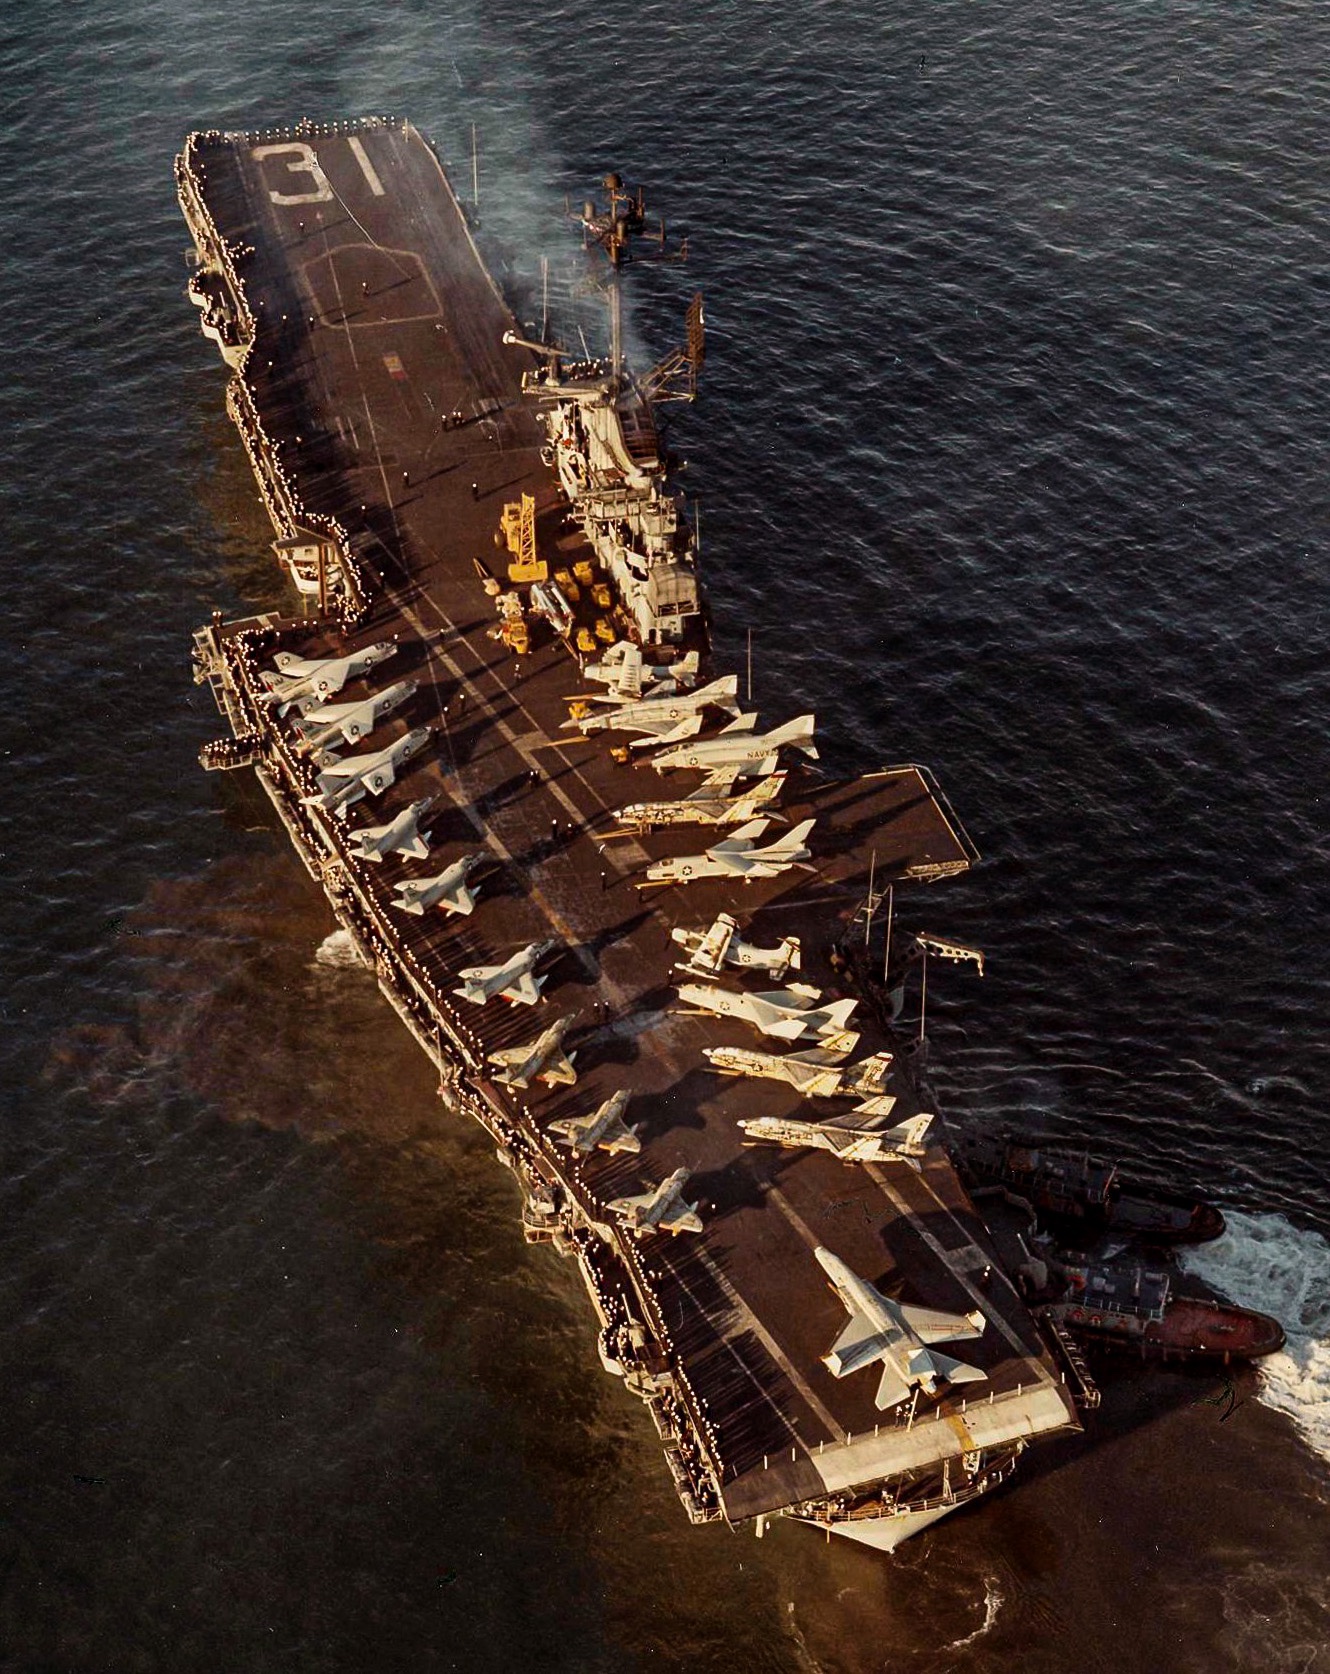 USS Bon Homme Richard (CVA-31) off San Diego, probably upon return from her last deployment circa 1970. Note that among the aircraft the two McD F-4 Phantoms and a NA RA-5C Vigilante.jpeg